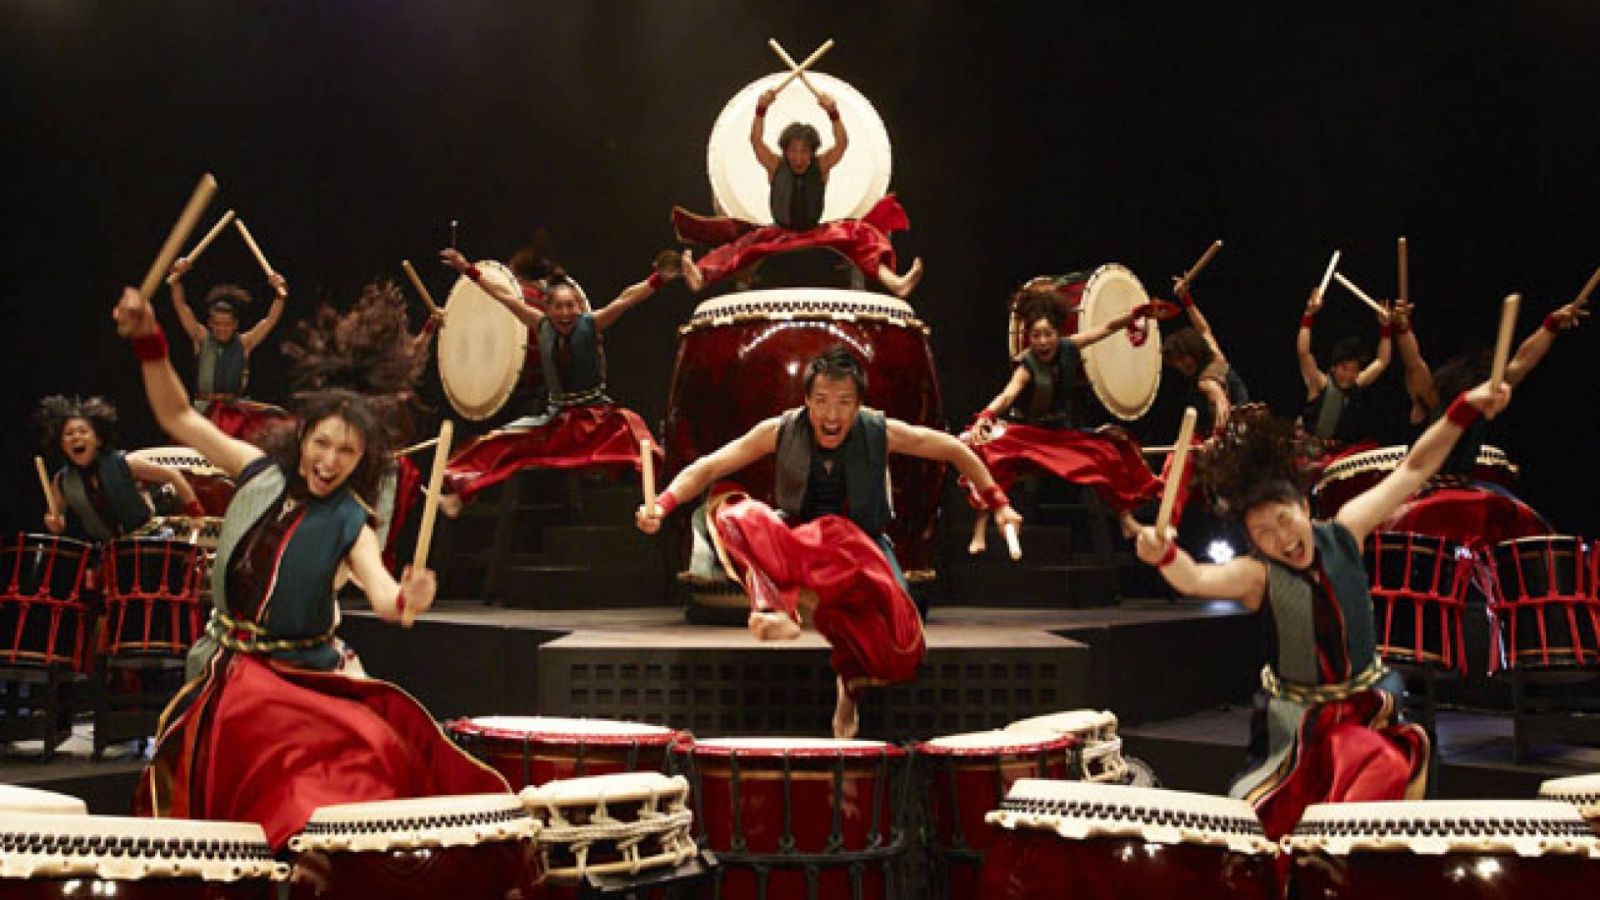 YAMATO - The Drummers of Japan mit 